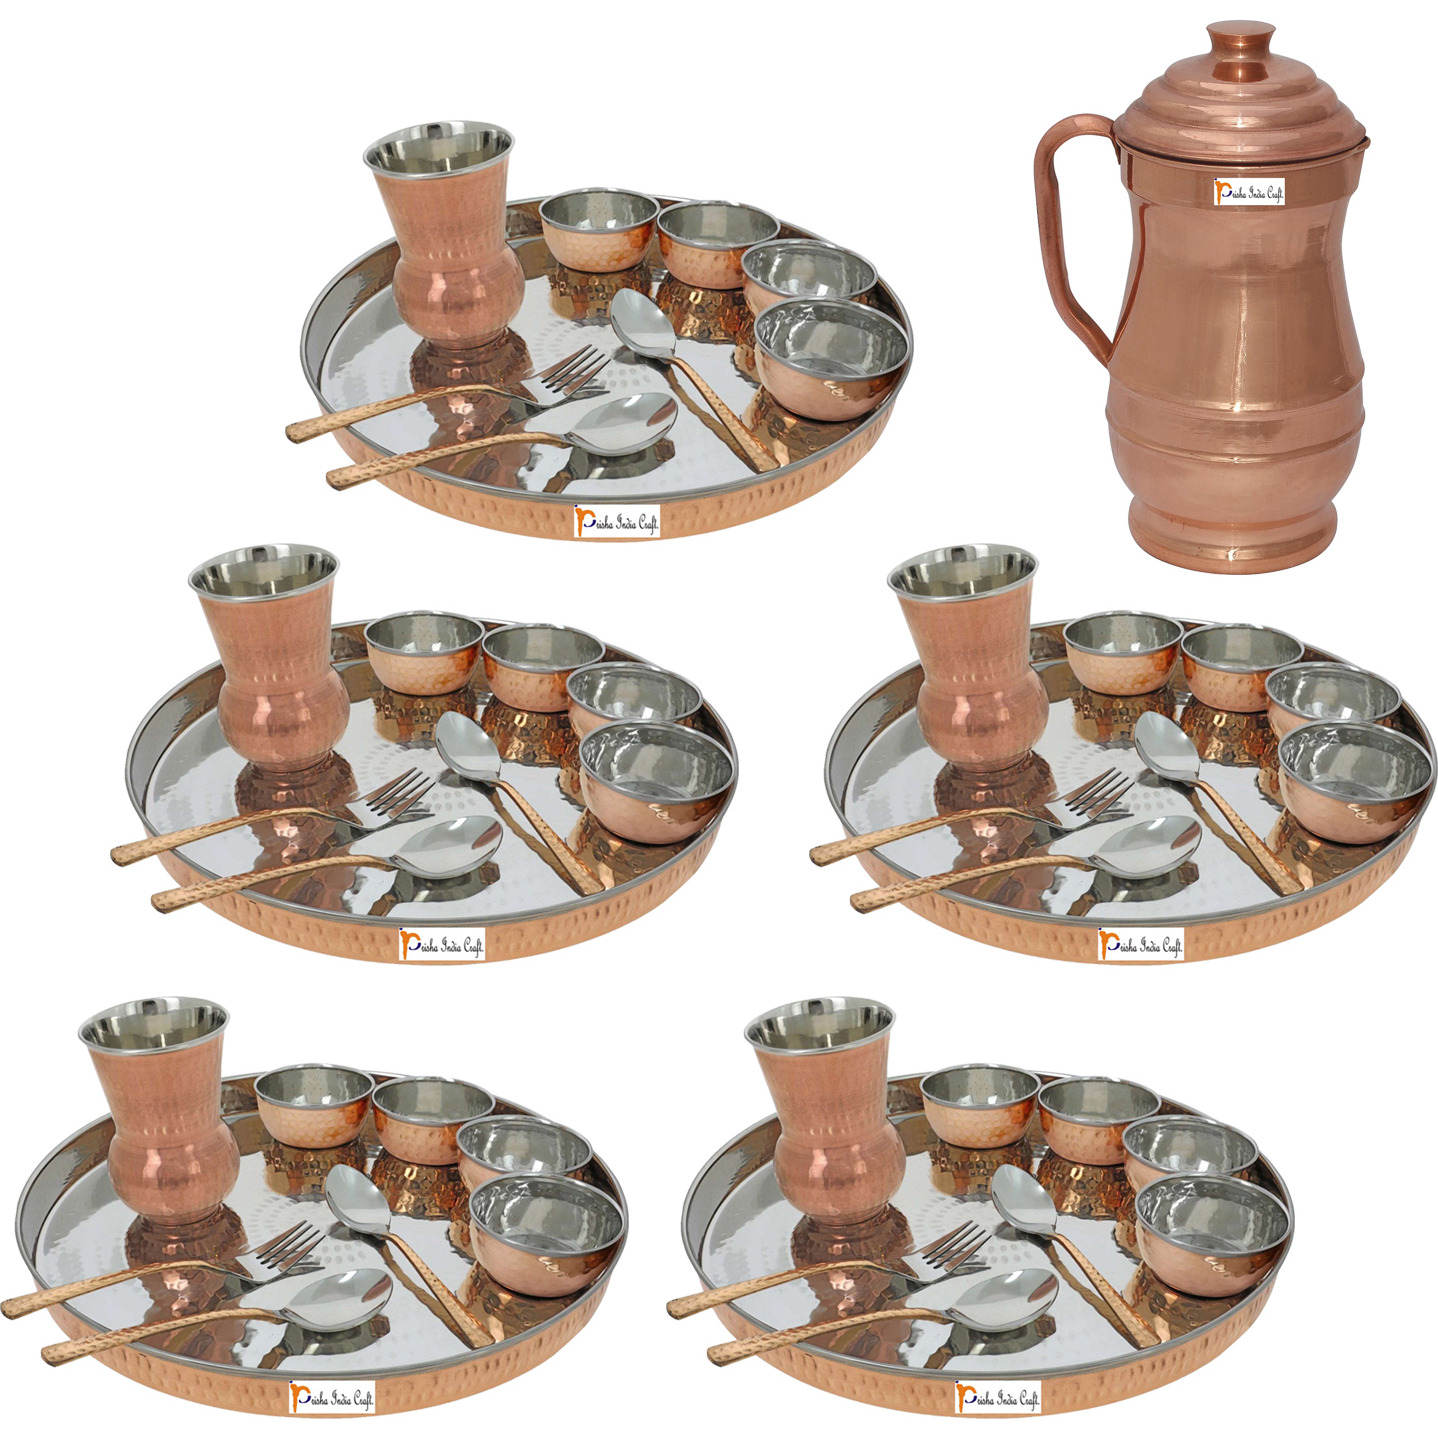 Prisha India Craft B. Set of 5 Dinnerware Traditional Stainless Steel Copper Dinner Set of Thali Plate, Bowls, Glass and Spoons, Dia 13  With 1 Pure Copper Maharaja Pitcher Jug - Christmas Gift